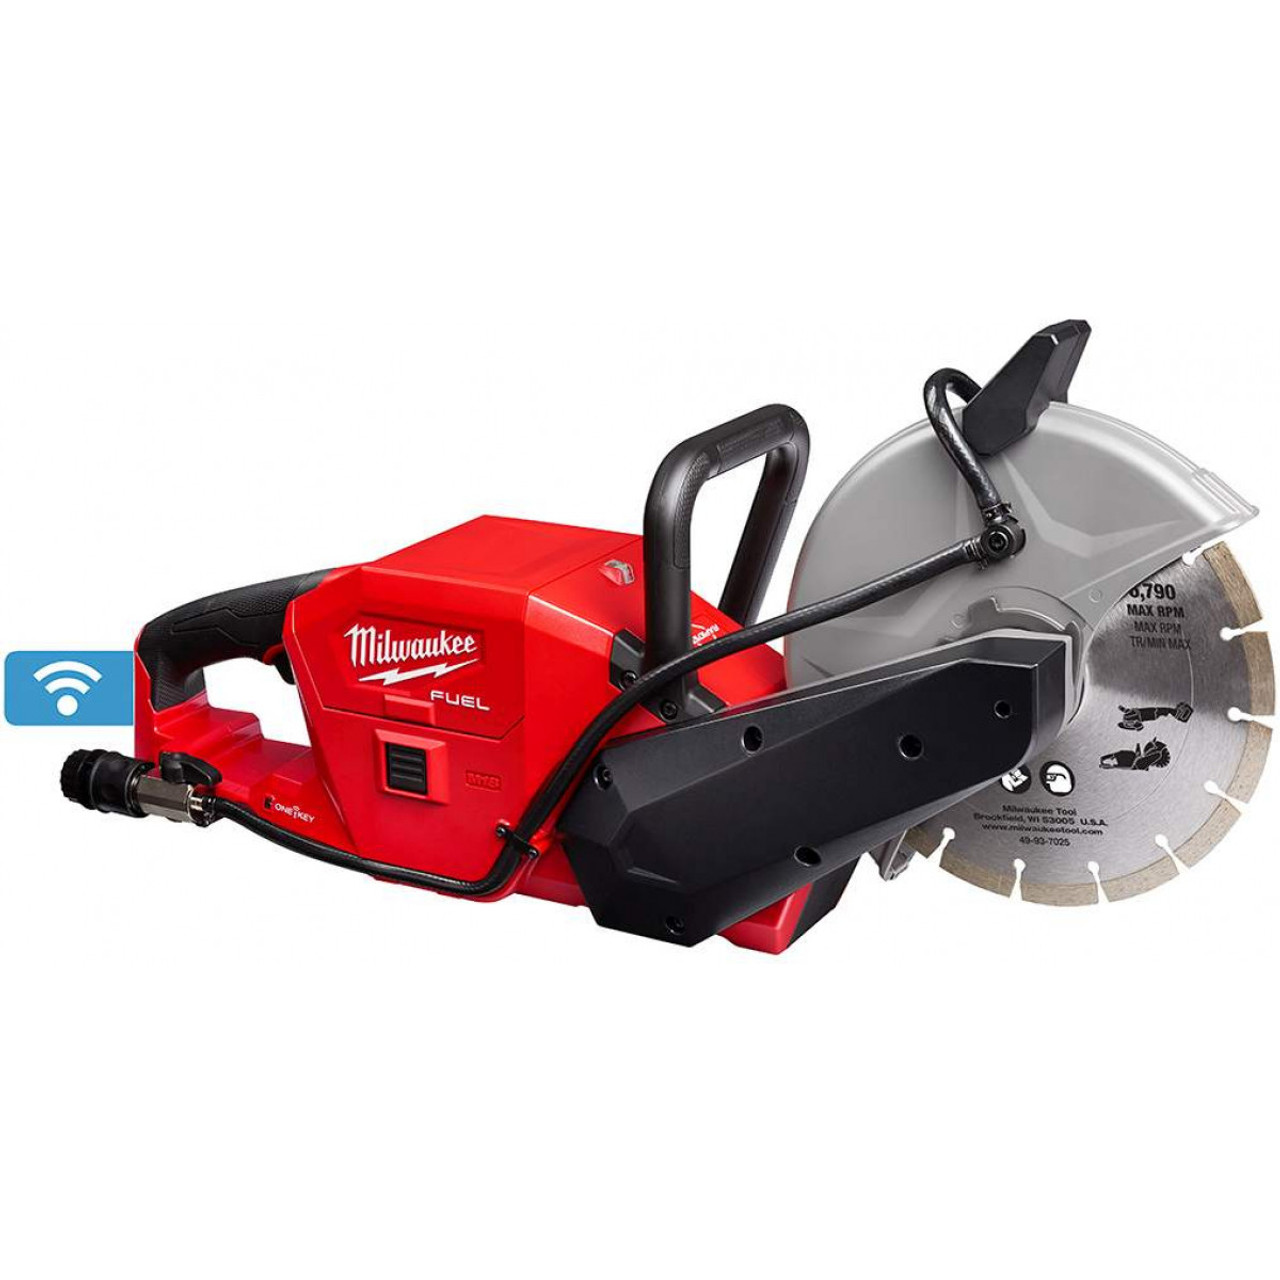 Electric Cut Off Saw Wet Dry Concrete Saw Power Cutter Break Tool with Blade 14" (Circular) - 1